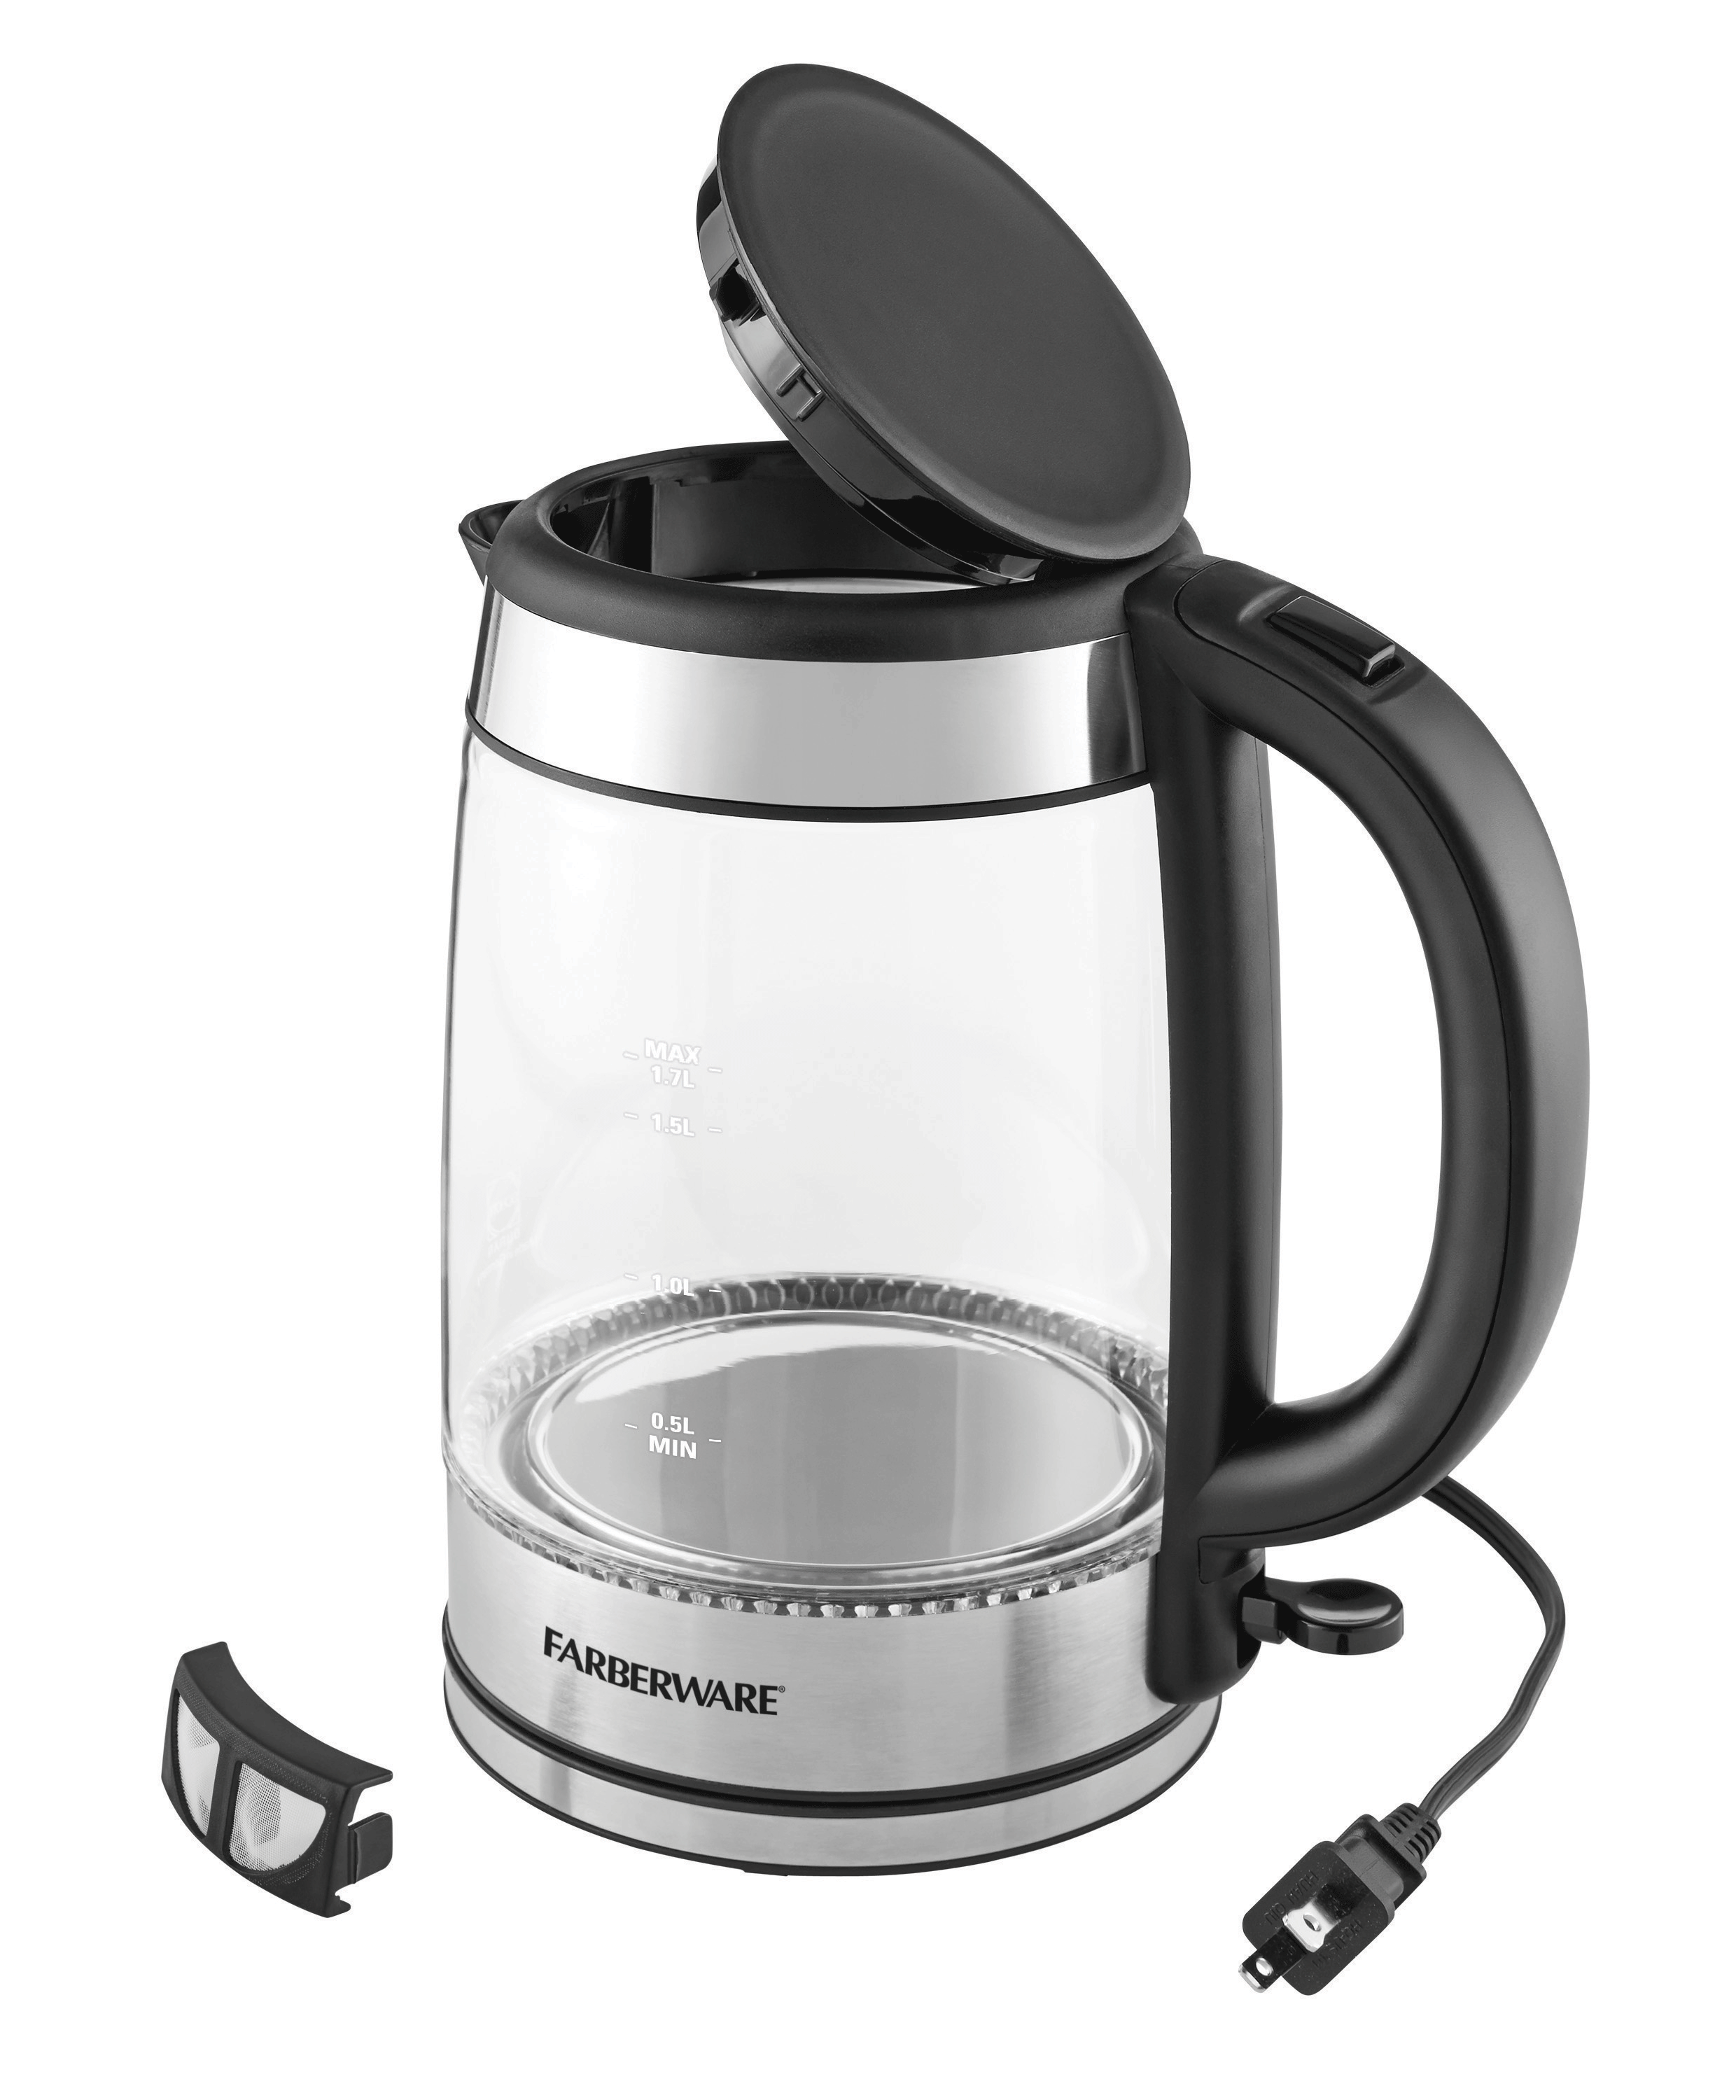 Farberware Royal Glass and Stainless Steel 1.7 Liter Electric Tea Kettle, Cordless - image 5 of 6